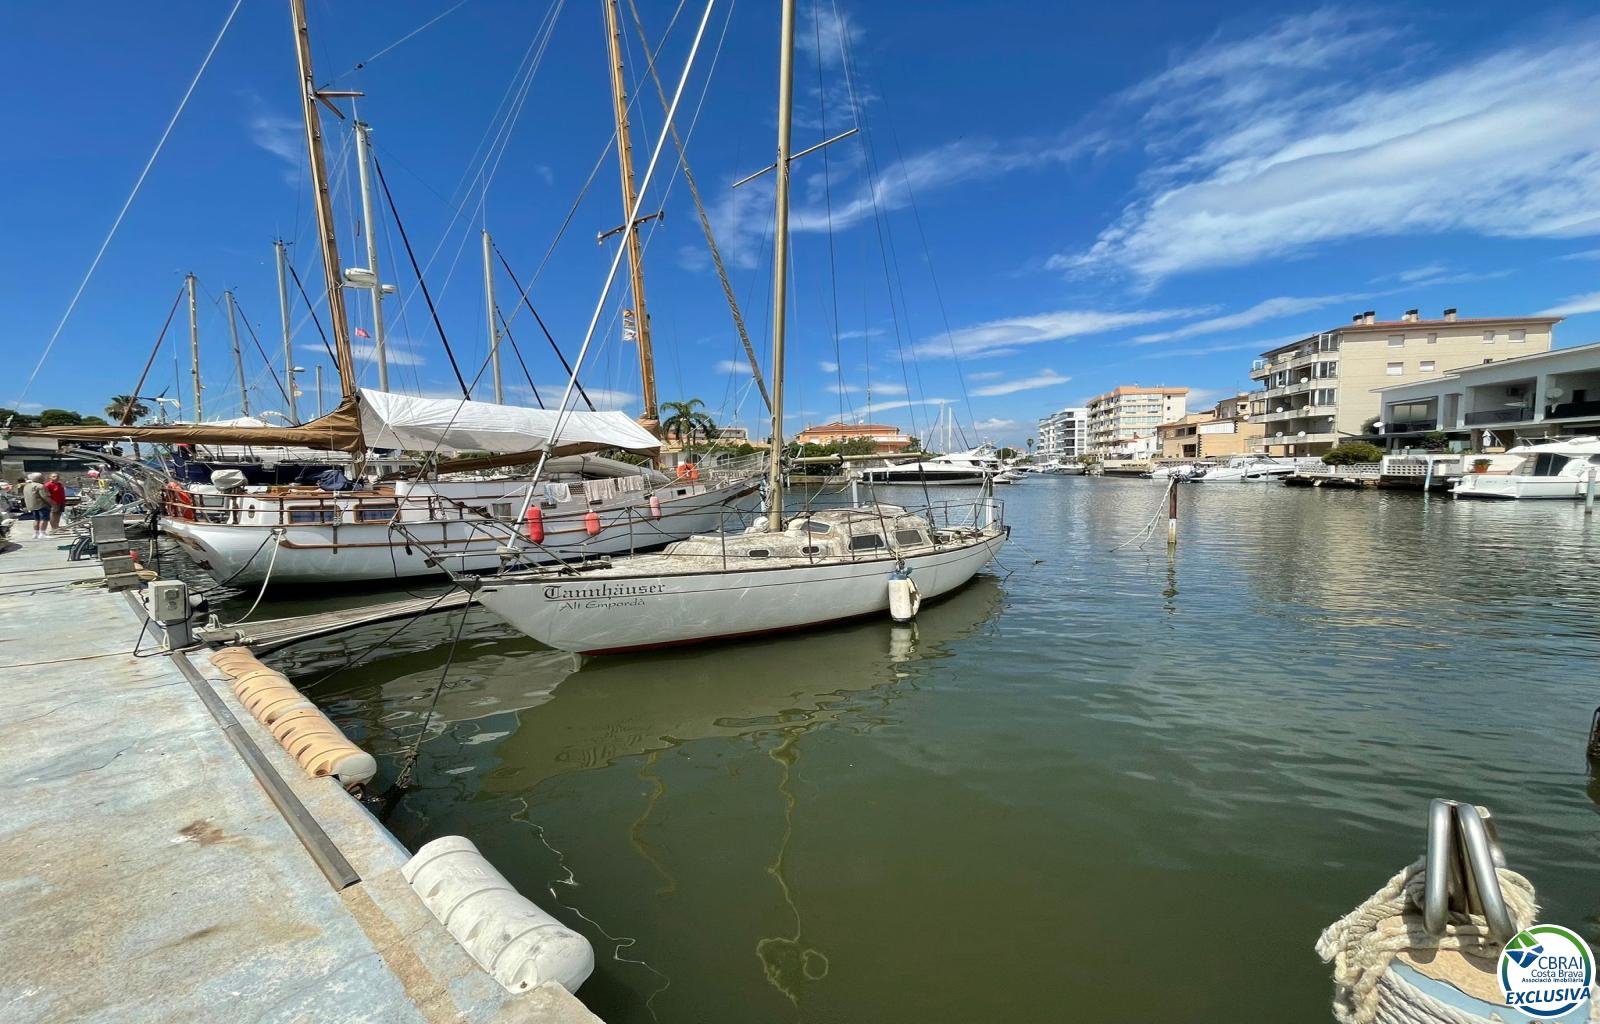 MOORING FOR A SAILBOAT VERY WELL LOCATED 4X14 METERS IN A PORT WITH COMMUNITY, SURVEILLANCE AND CLOSE TO THE MAIN CANAL AND THE SEA